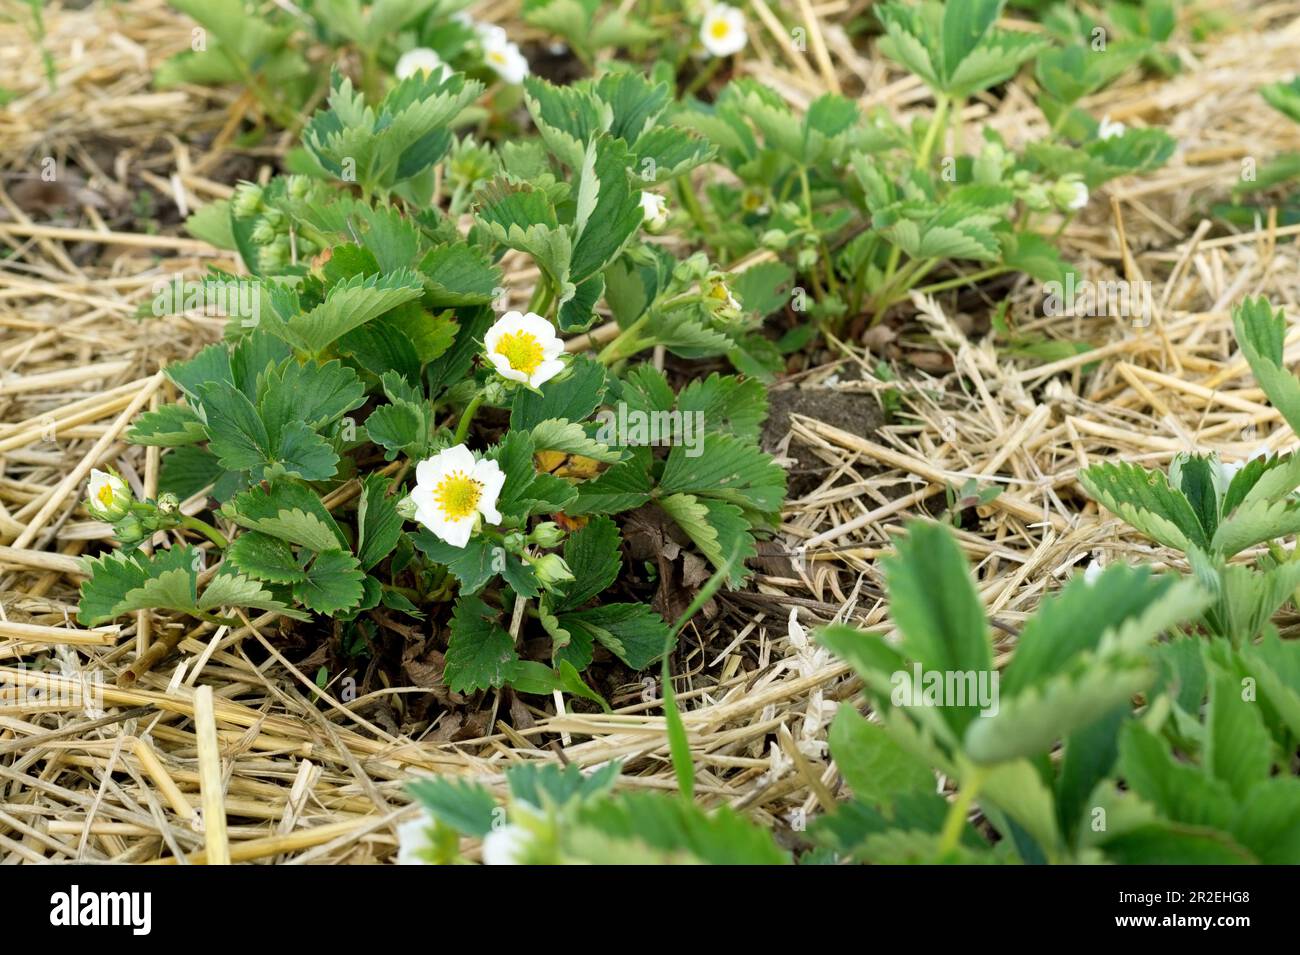 Straw mulch for strawberries plants. Mulching garden strawberries on the garden beds straw to protect against weed germination. Young strawberry bushe Stock Photo